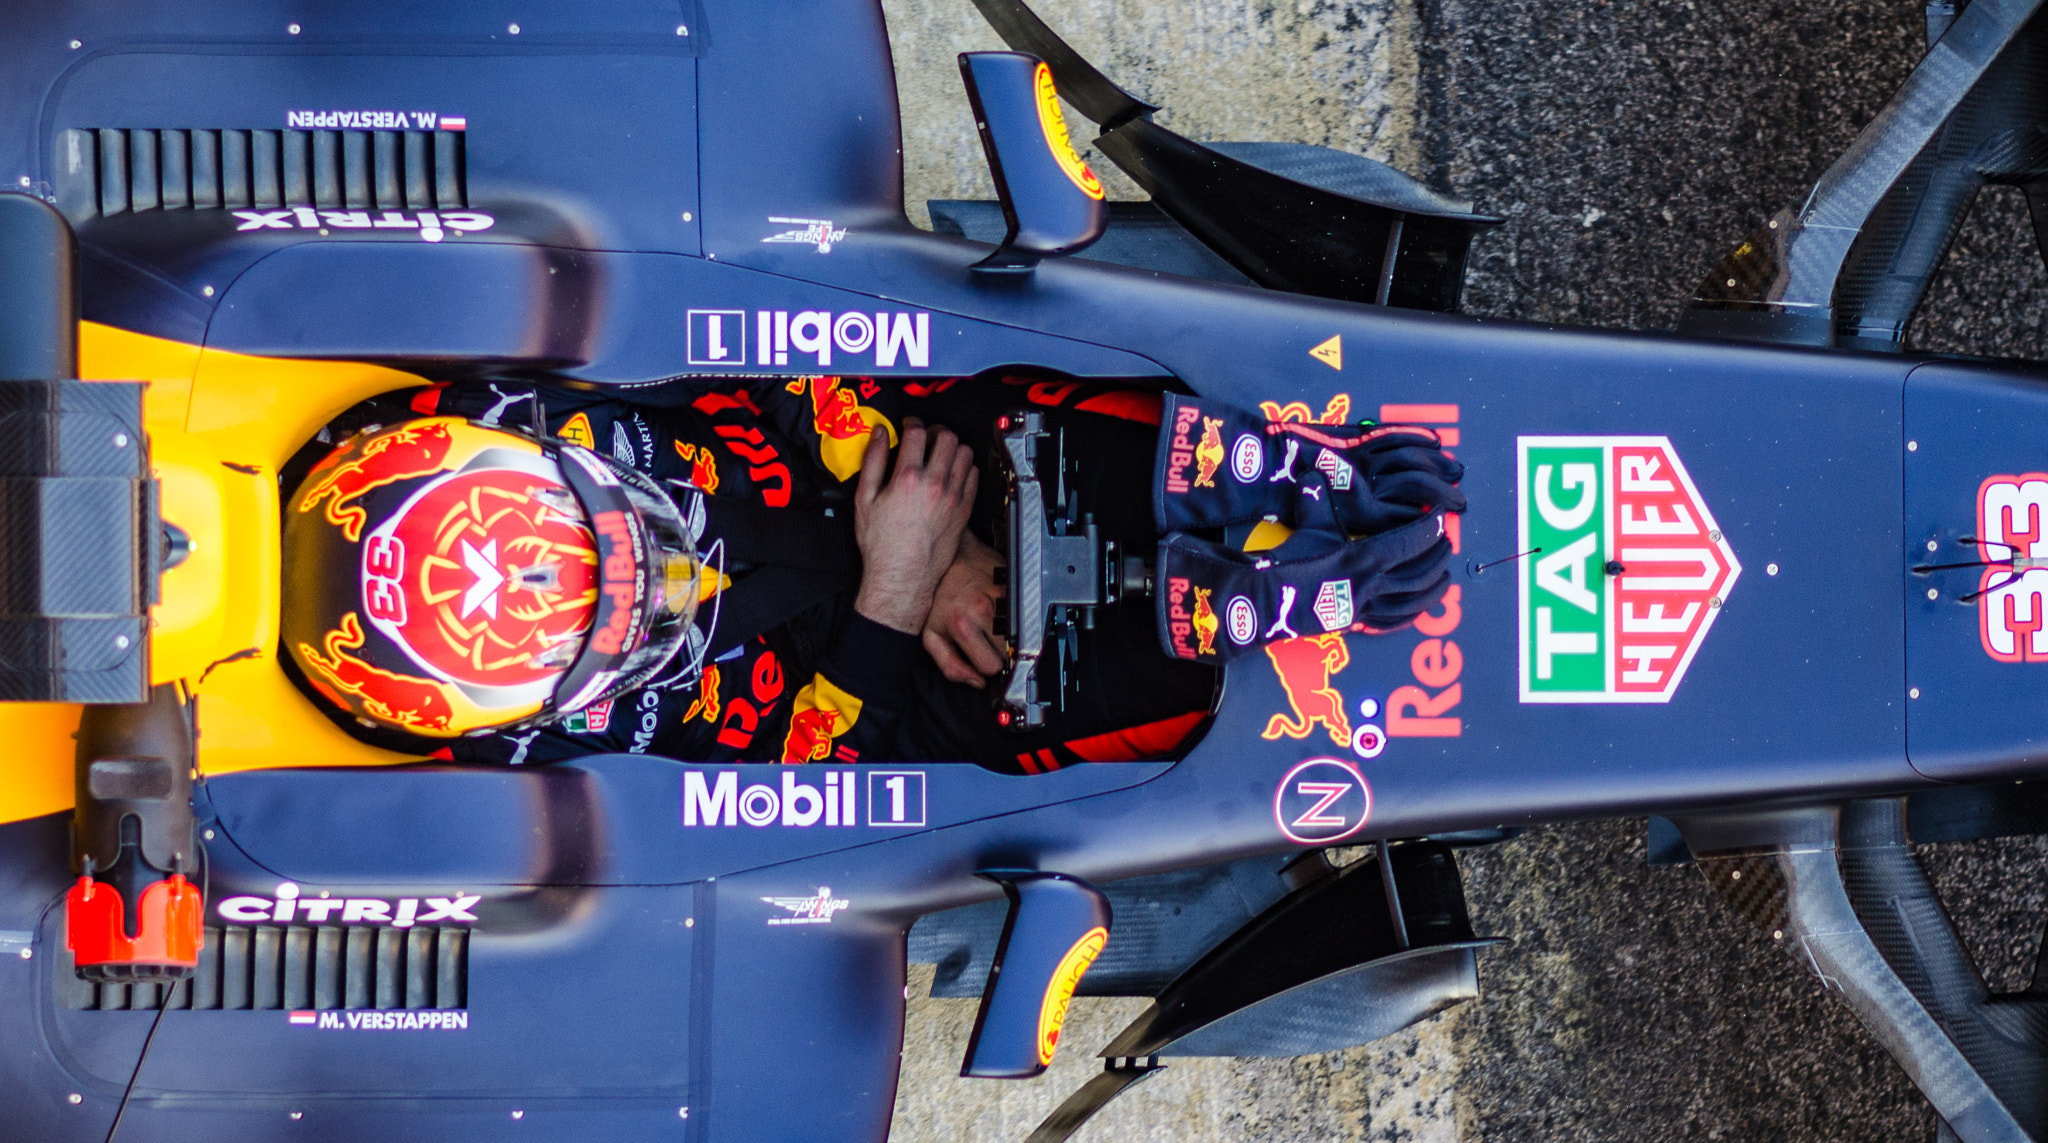 Nikon D5100 sample photo. Work well done, max verstappen photography